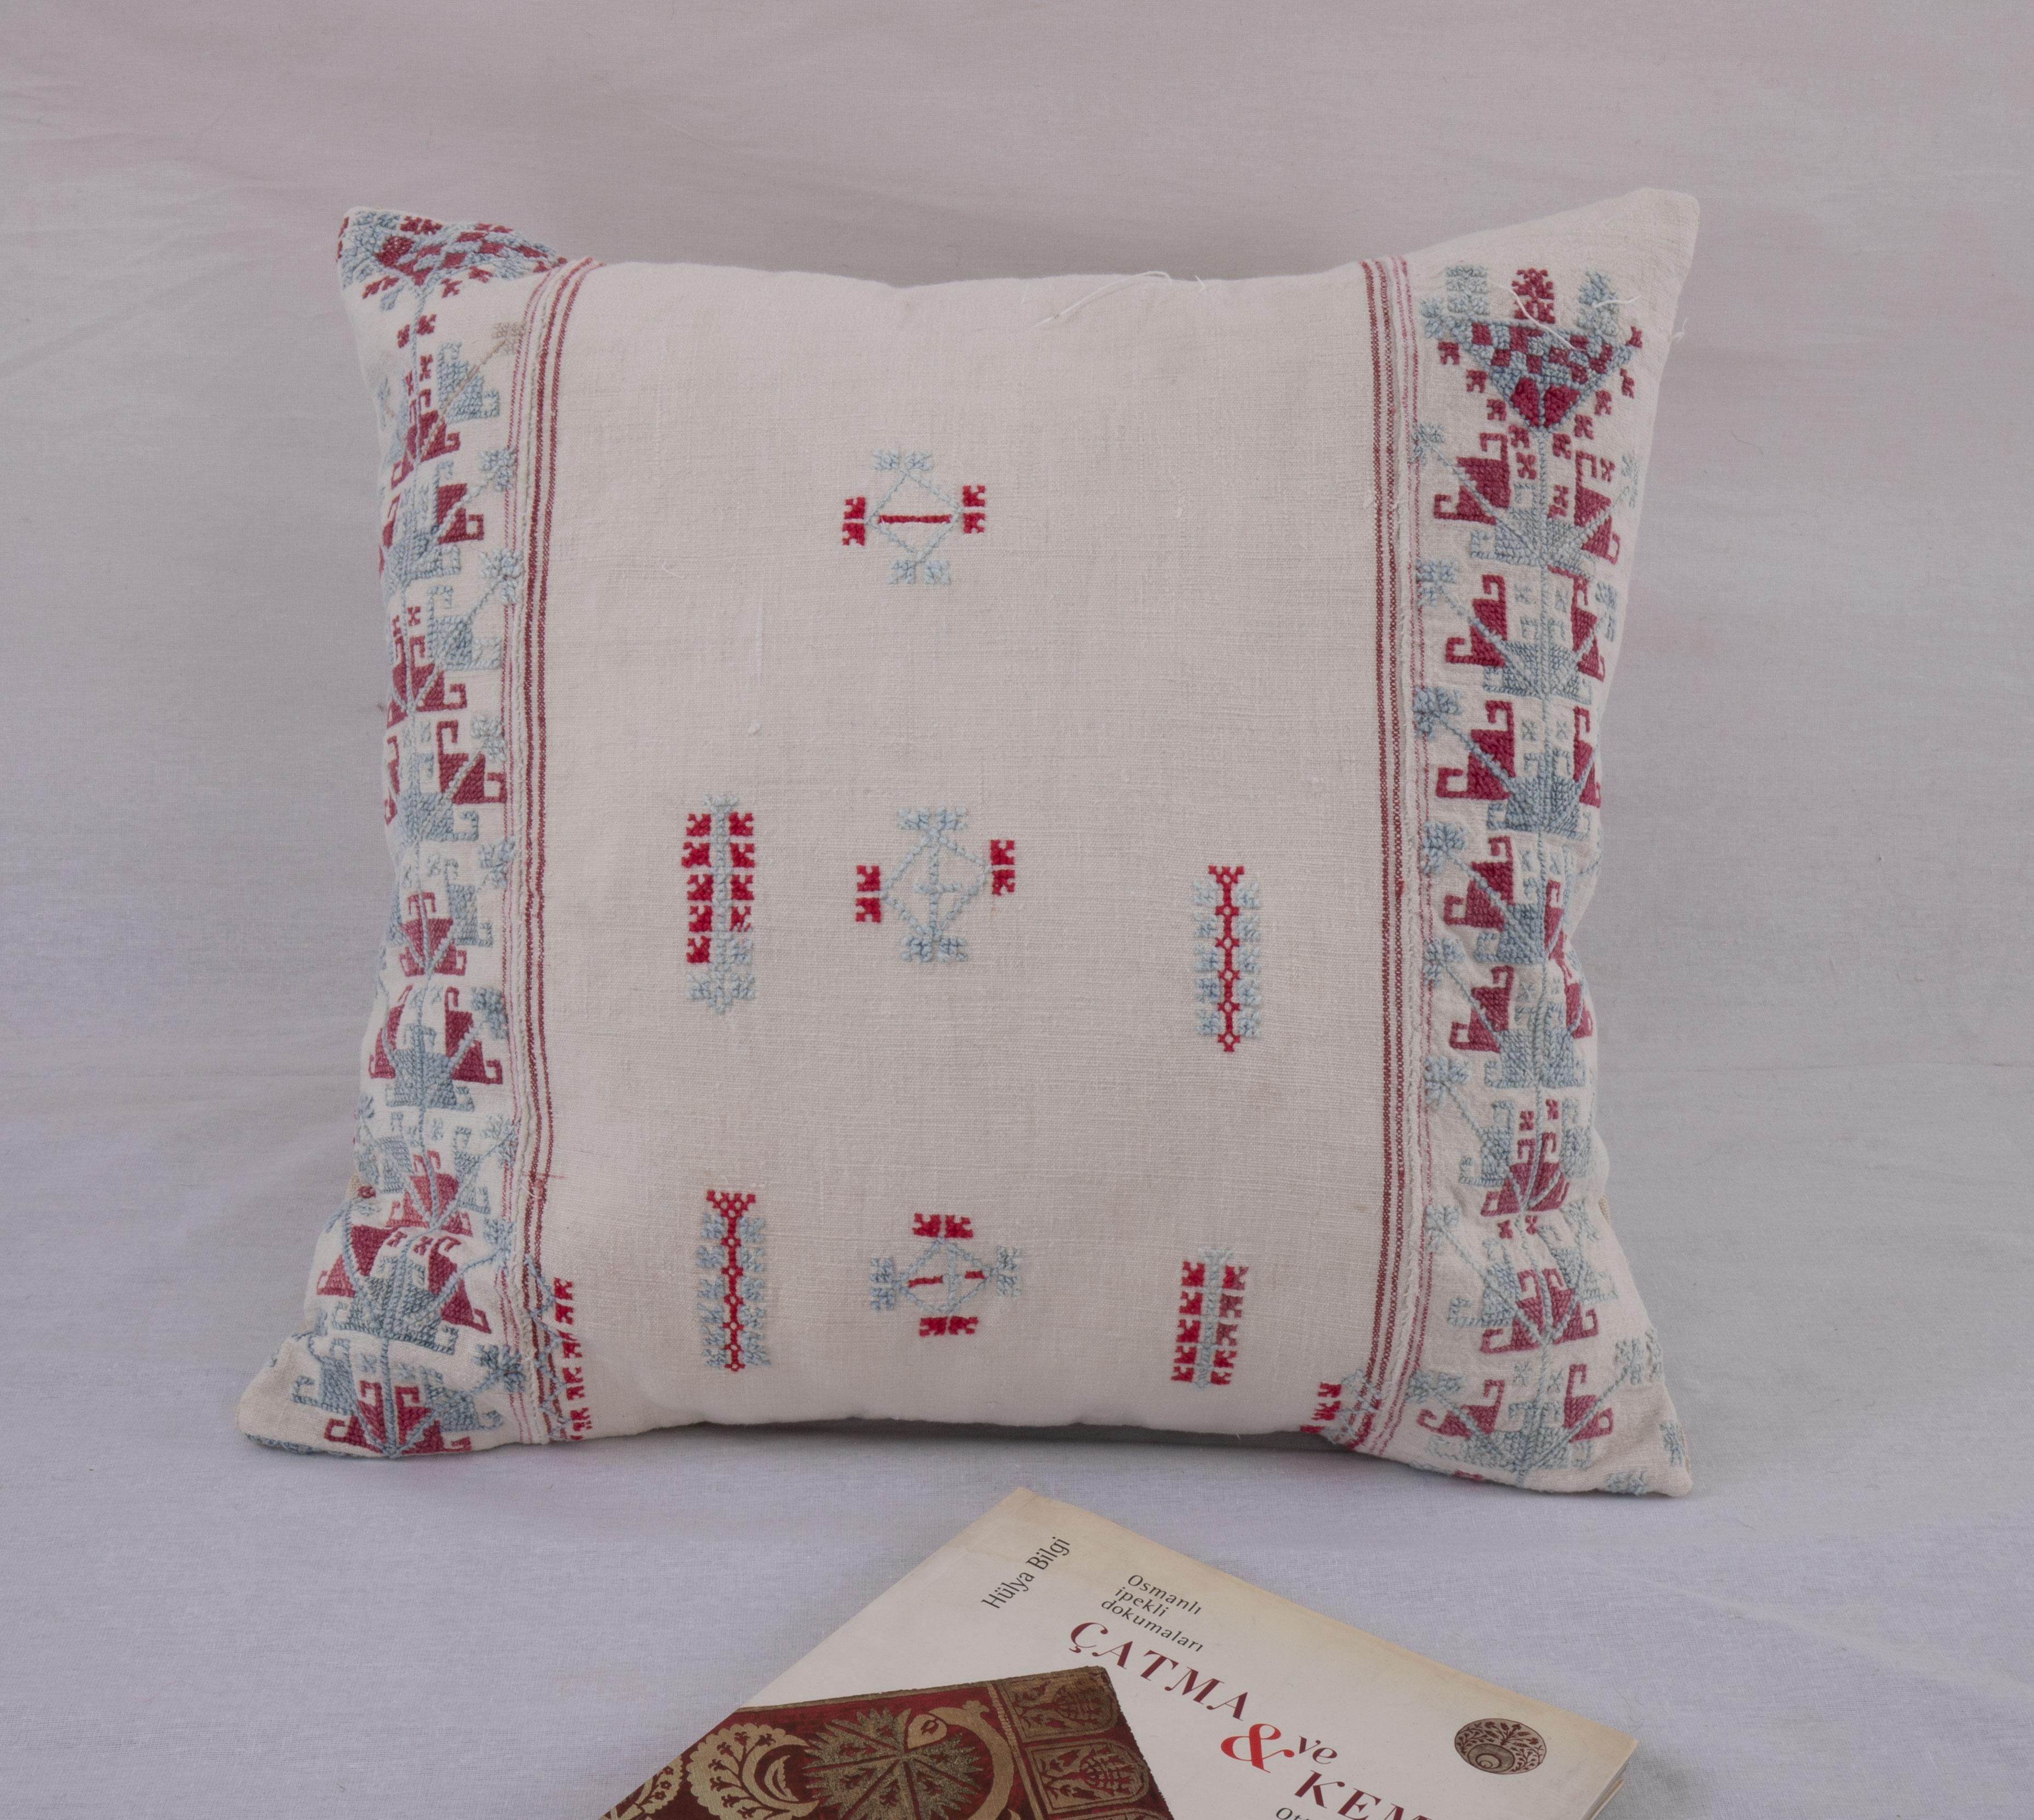 Rustic Pillow Cover Made from an Anatolian Embroidered Skirt, 2nd Quarter 20th C. For Sale